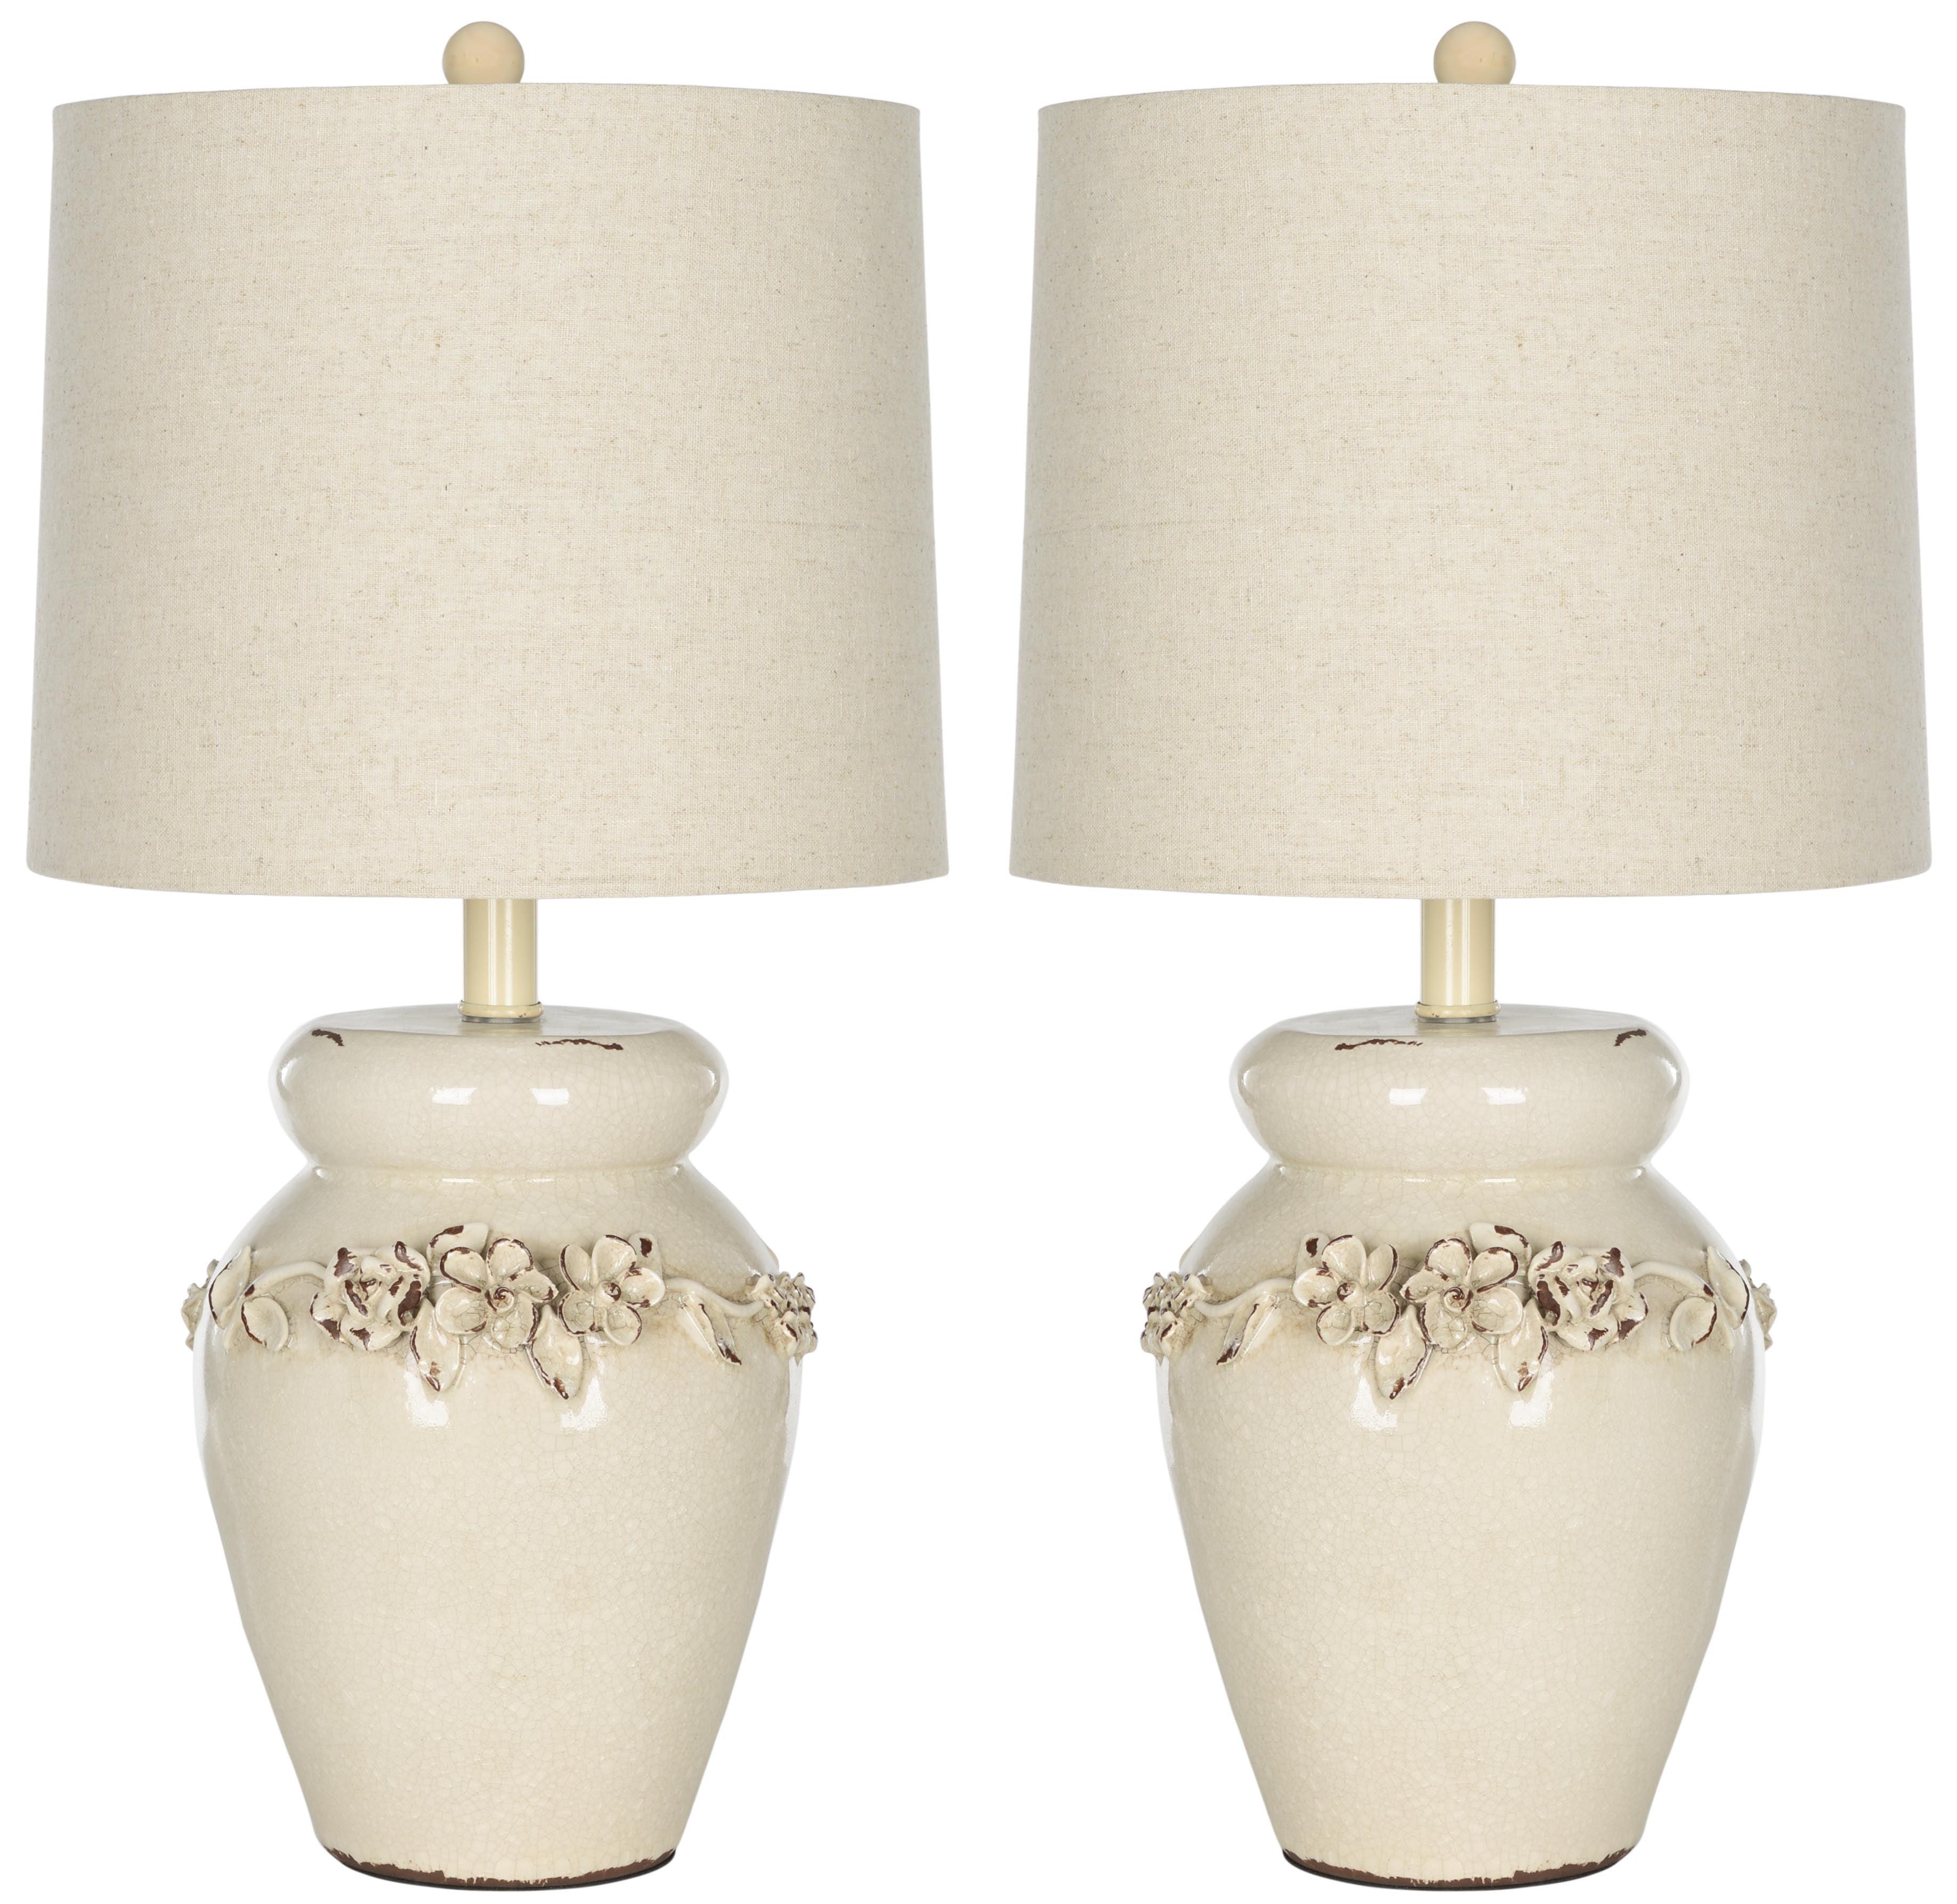 Tuscan Inspired Cream Ceramic Vase Table Lamp Set with Linen Shade